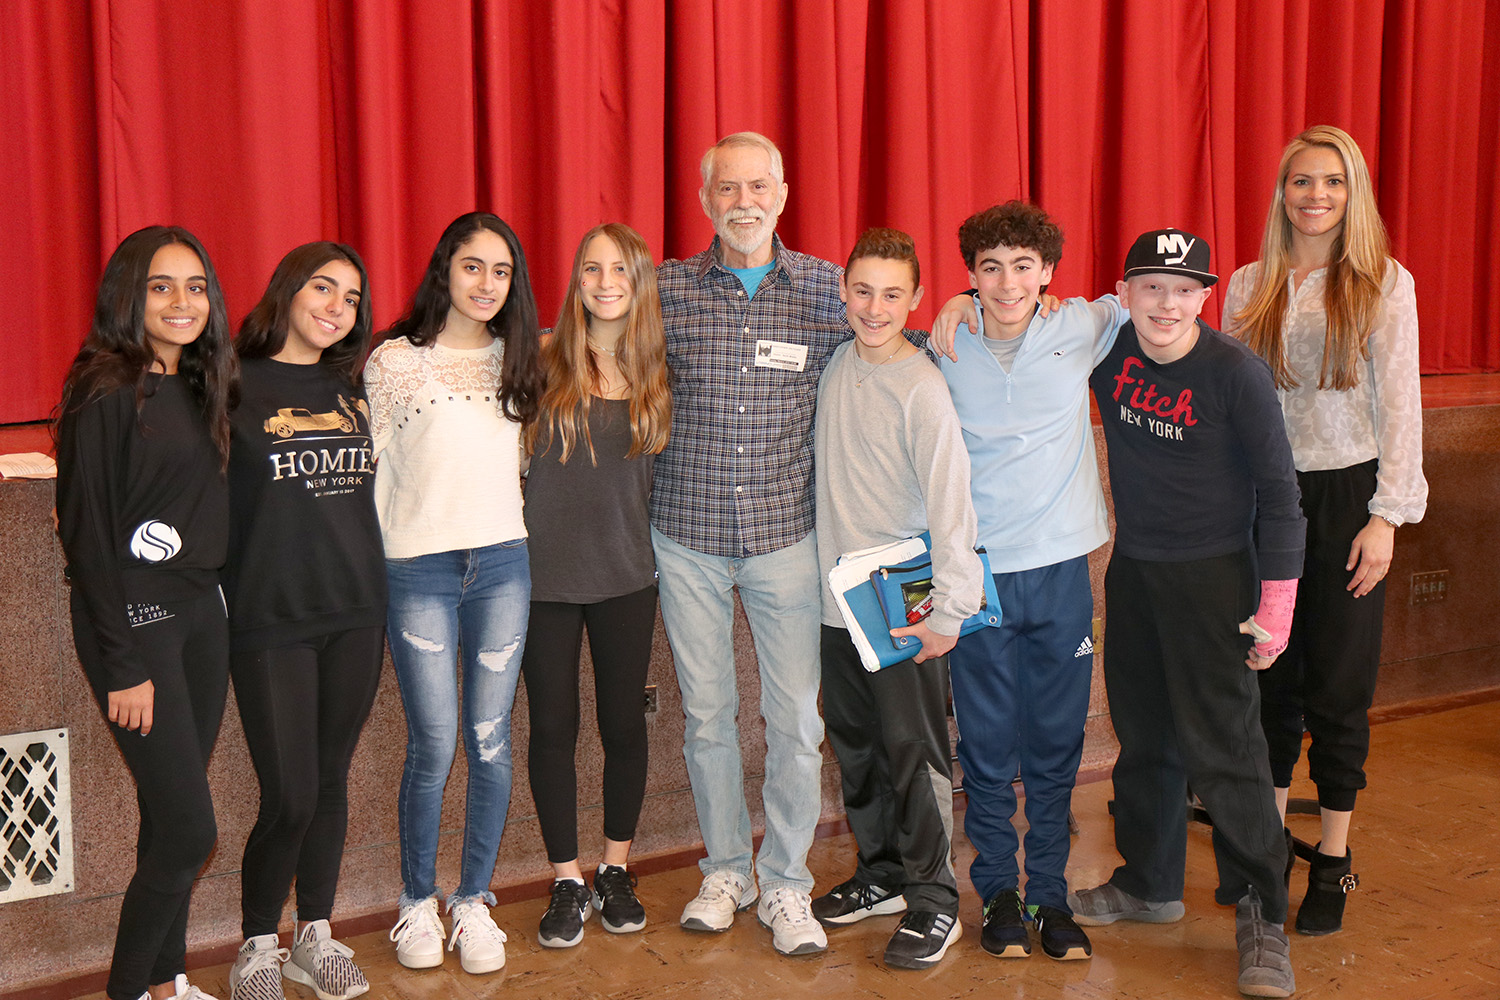 Author Chris Crutcher, in center, is joined by eighth-grade students and Cinthia Serowik, English department head at North Middle. (Photo courtesy of the Great Neck Public Schools)